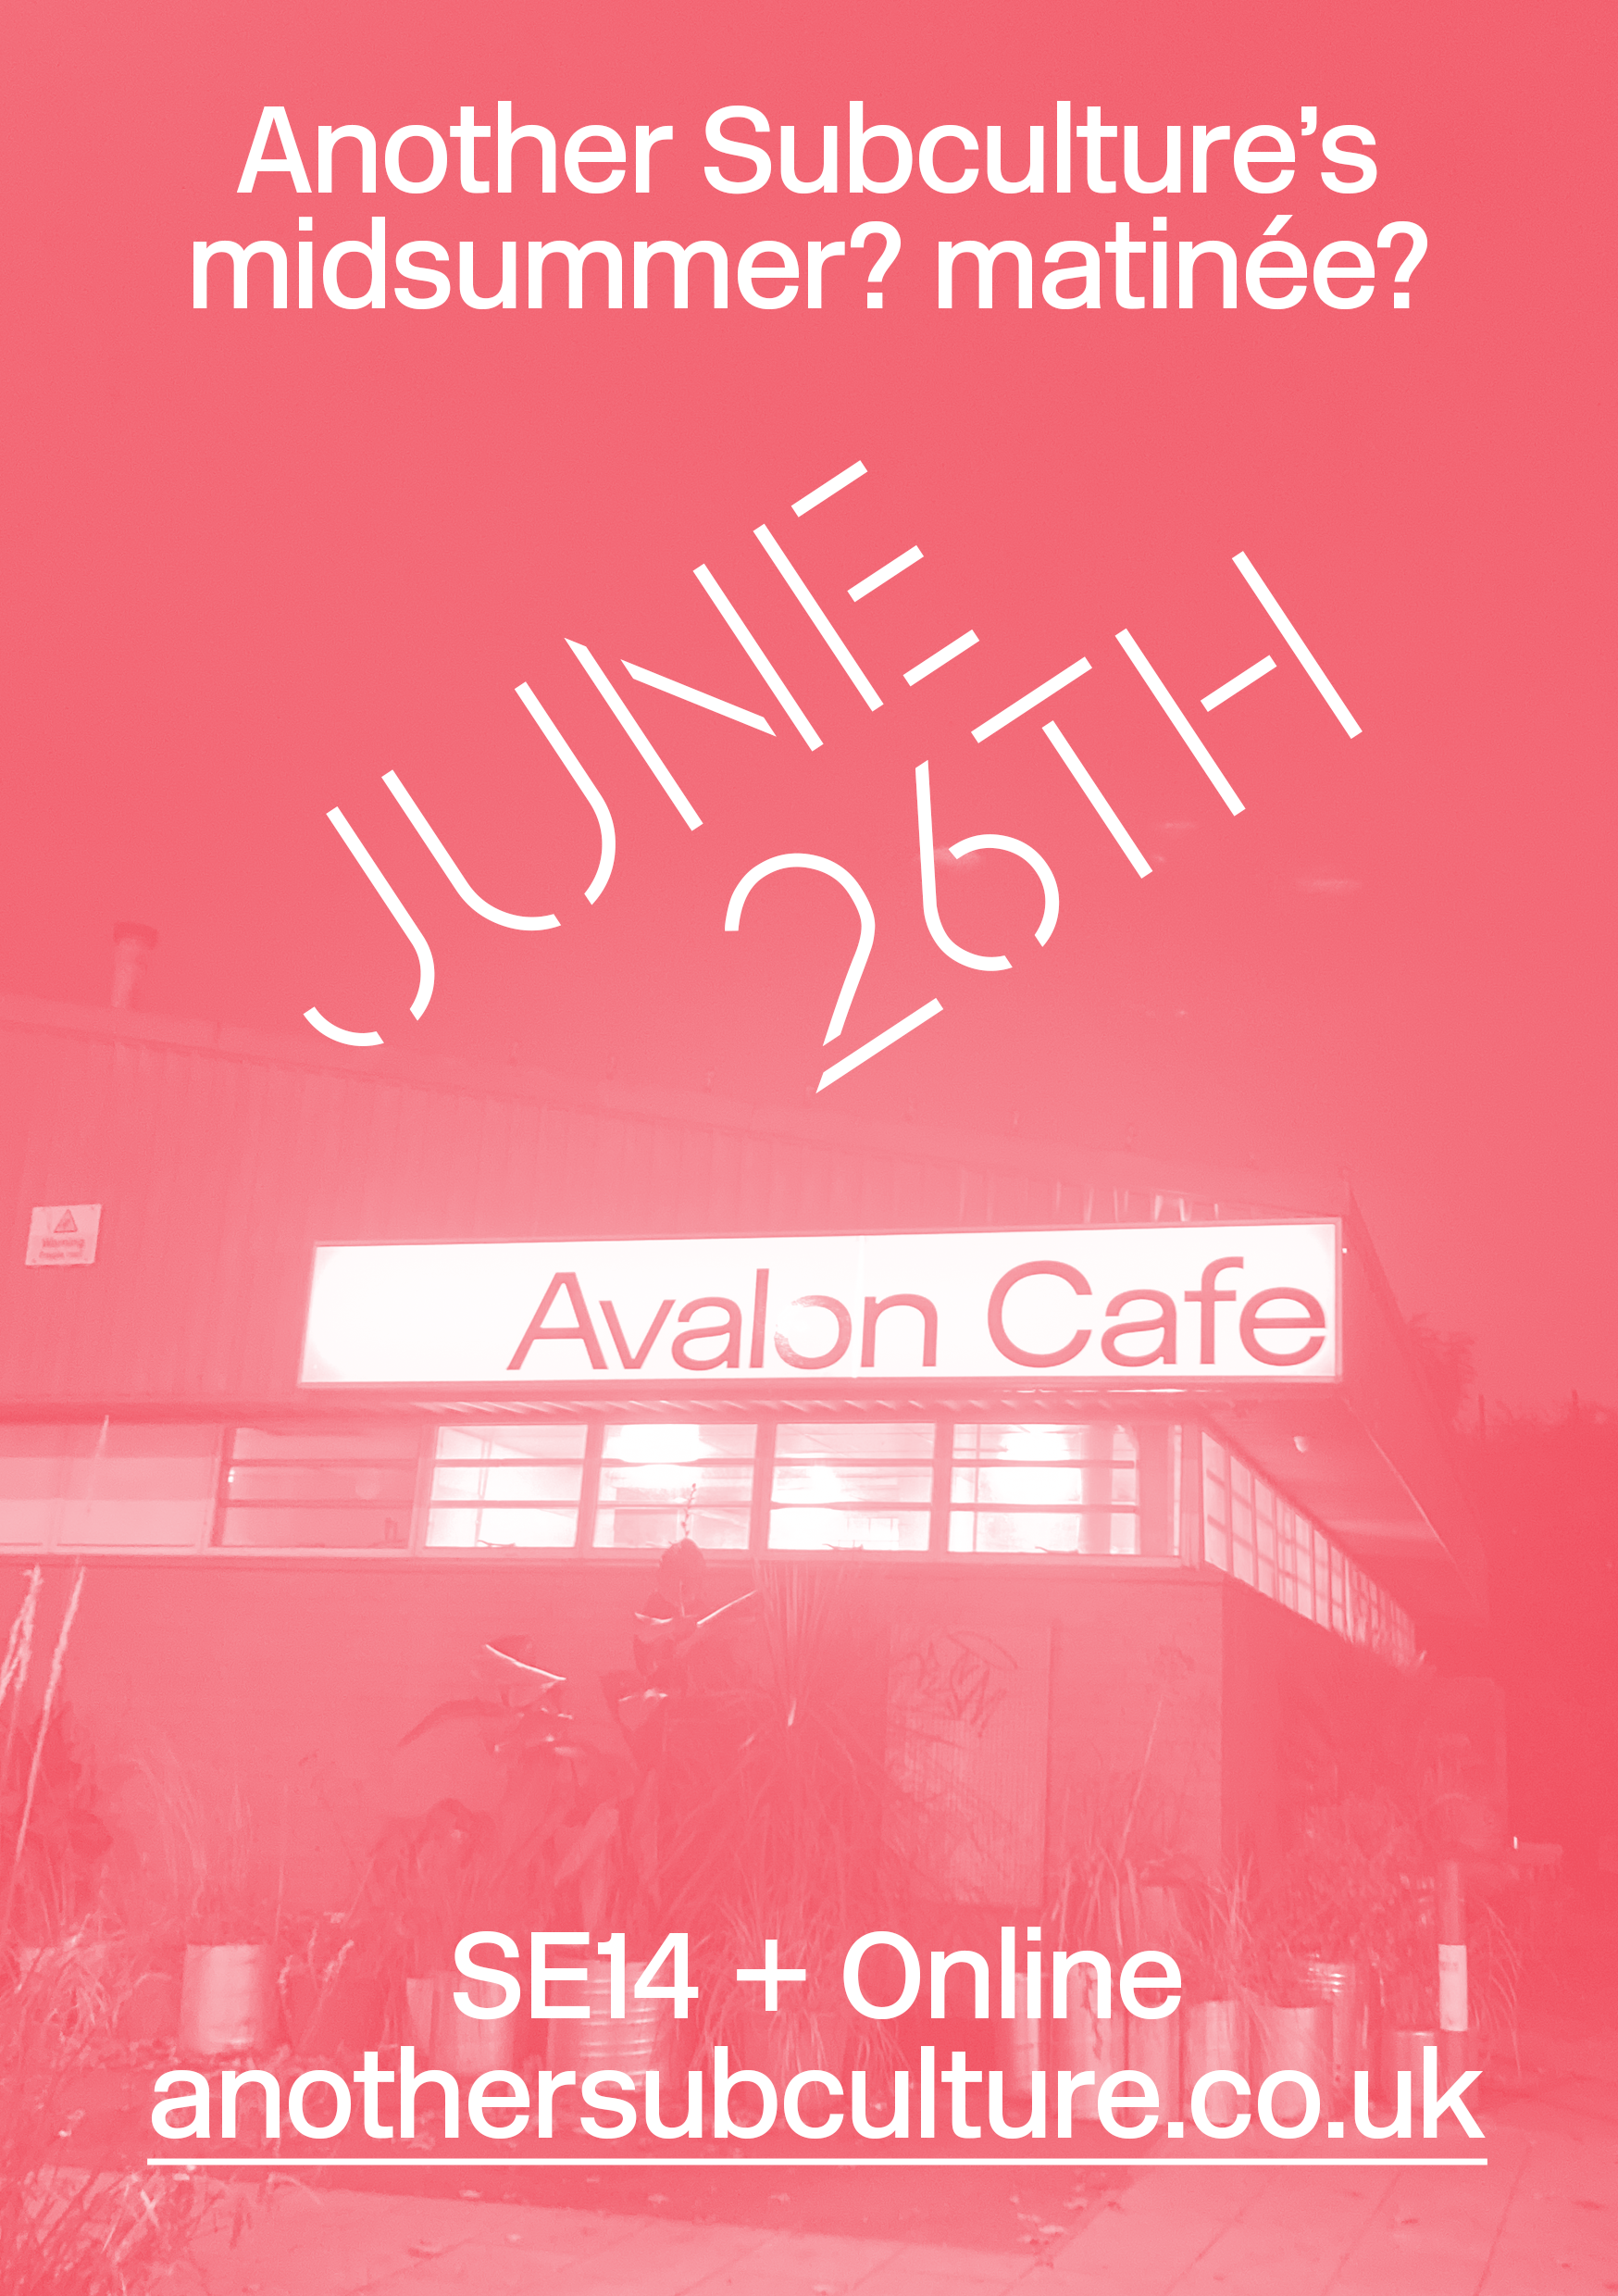 Another Subculture at the Avalon Cafe, Sunday 26th June